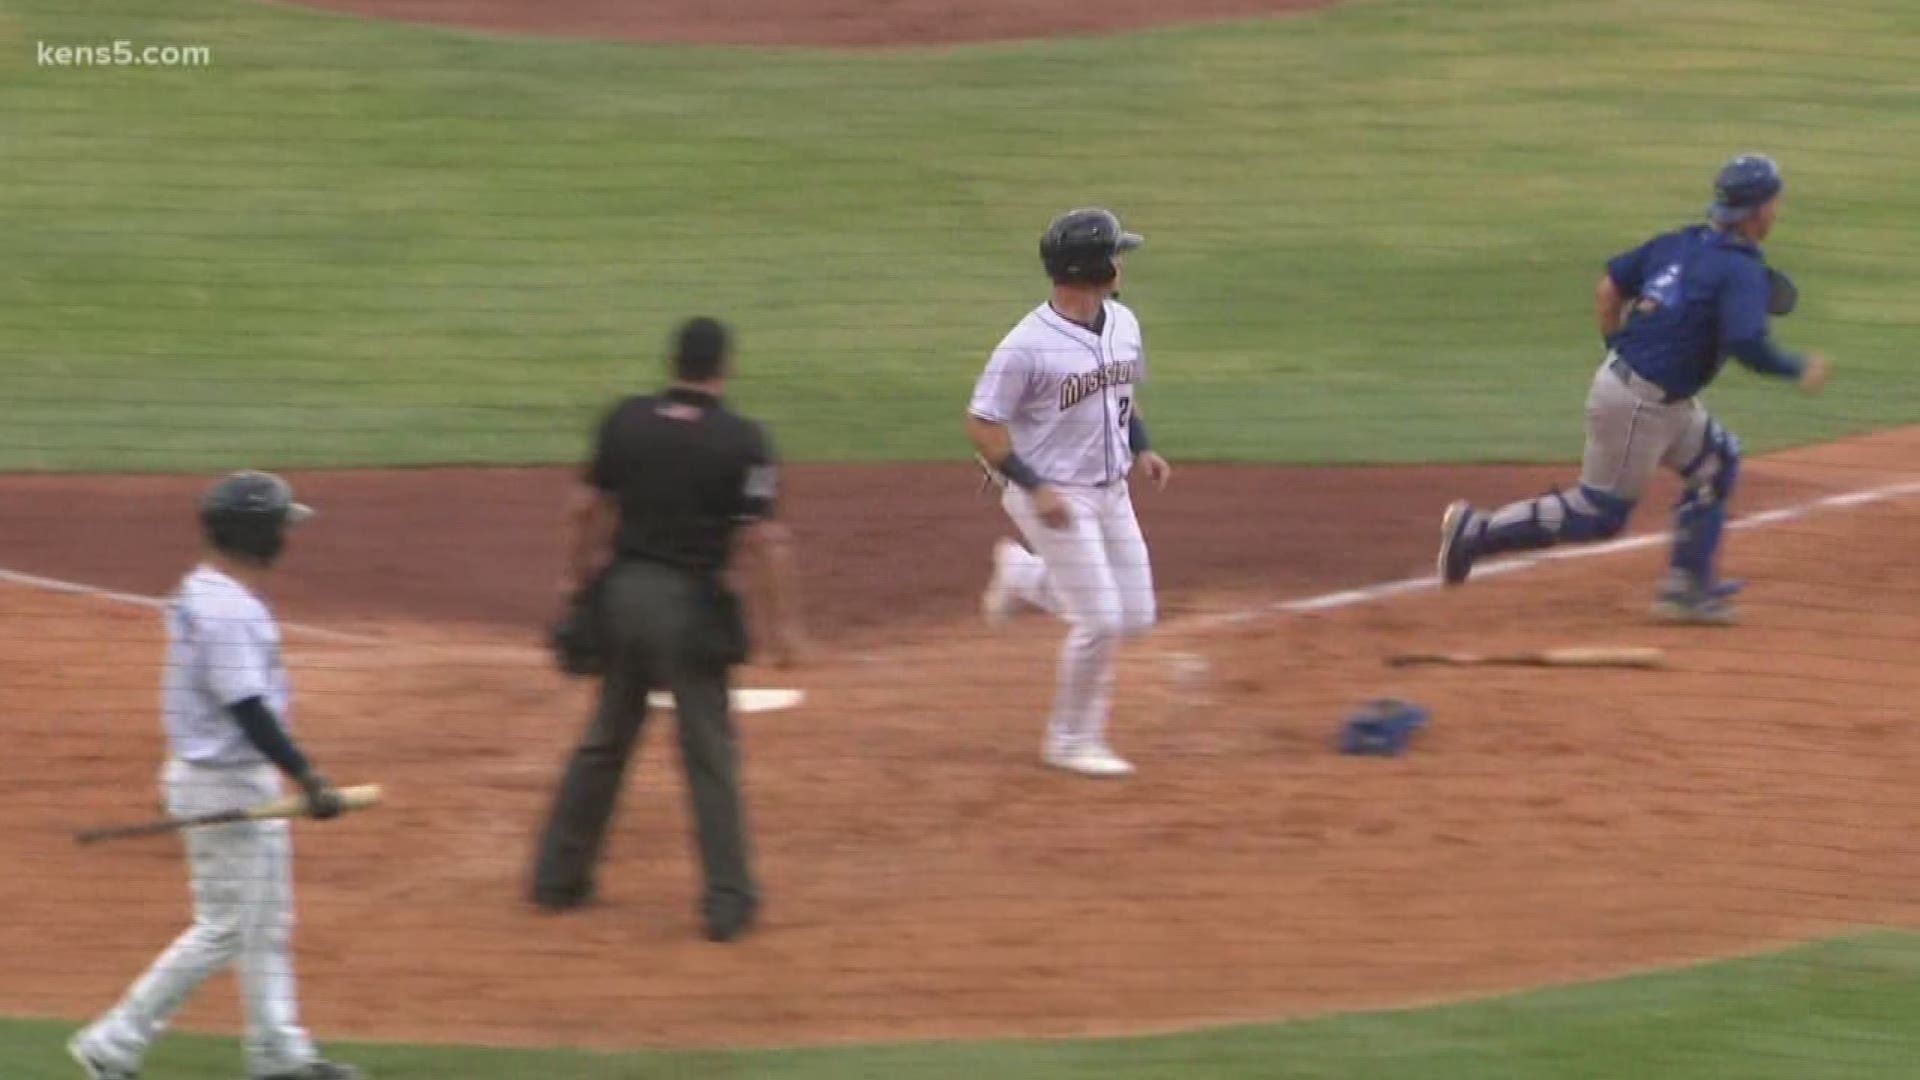 A 5-run fourth inning propelled the San Antonio Missions to a win over the Omaha Storm Chasers.